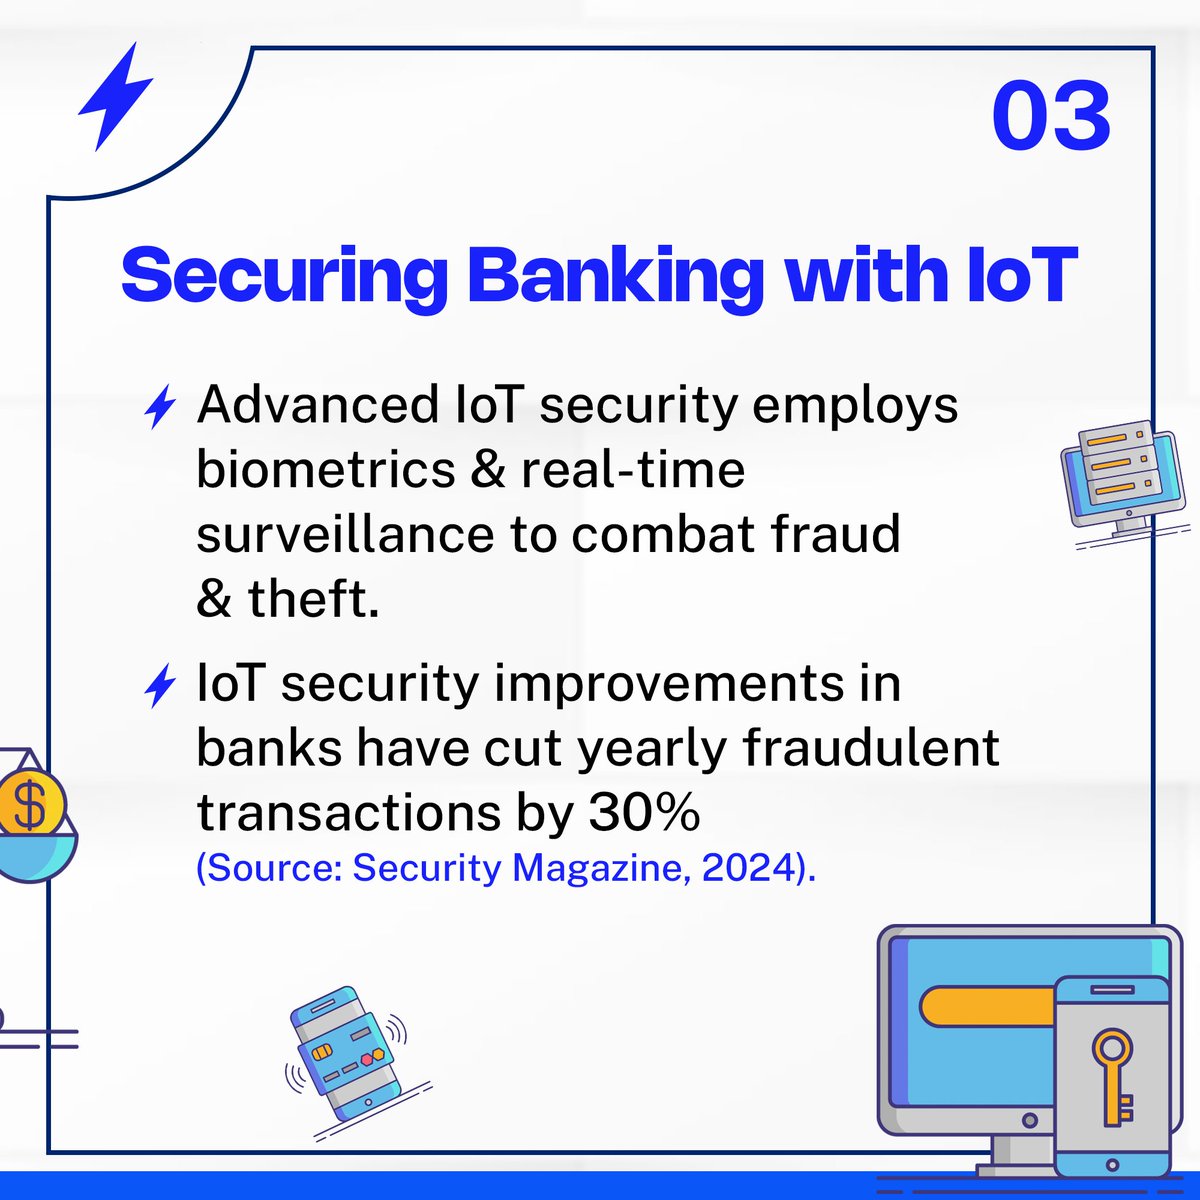 Explore how IoT is transforming banking! From reducing costs to enhancing security, the future of finance is here. 🌍💡
#BankingReimagined #FutureOfBankingWithIoT #BankingReimagined #IoTinBanking #DigitalTransformation #FinTech #SmartBanking #TechInFinance #rechargezap